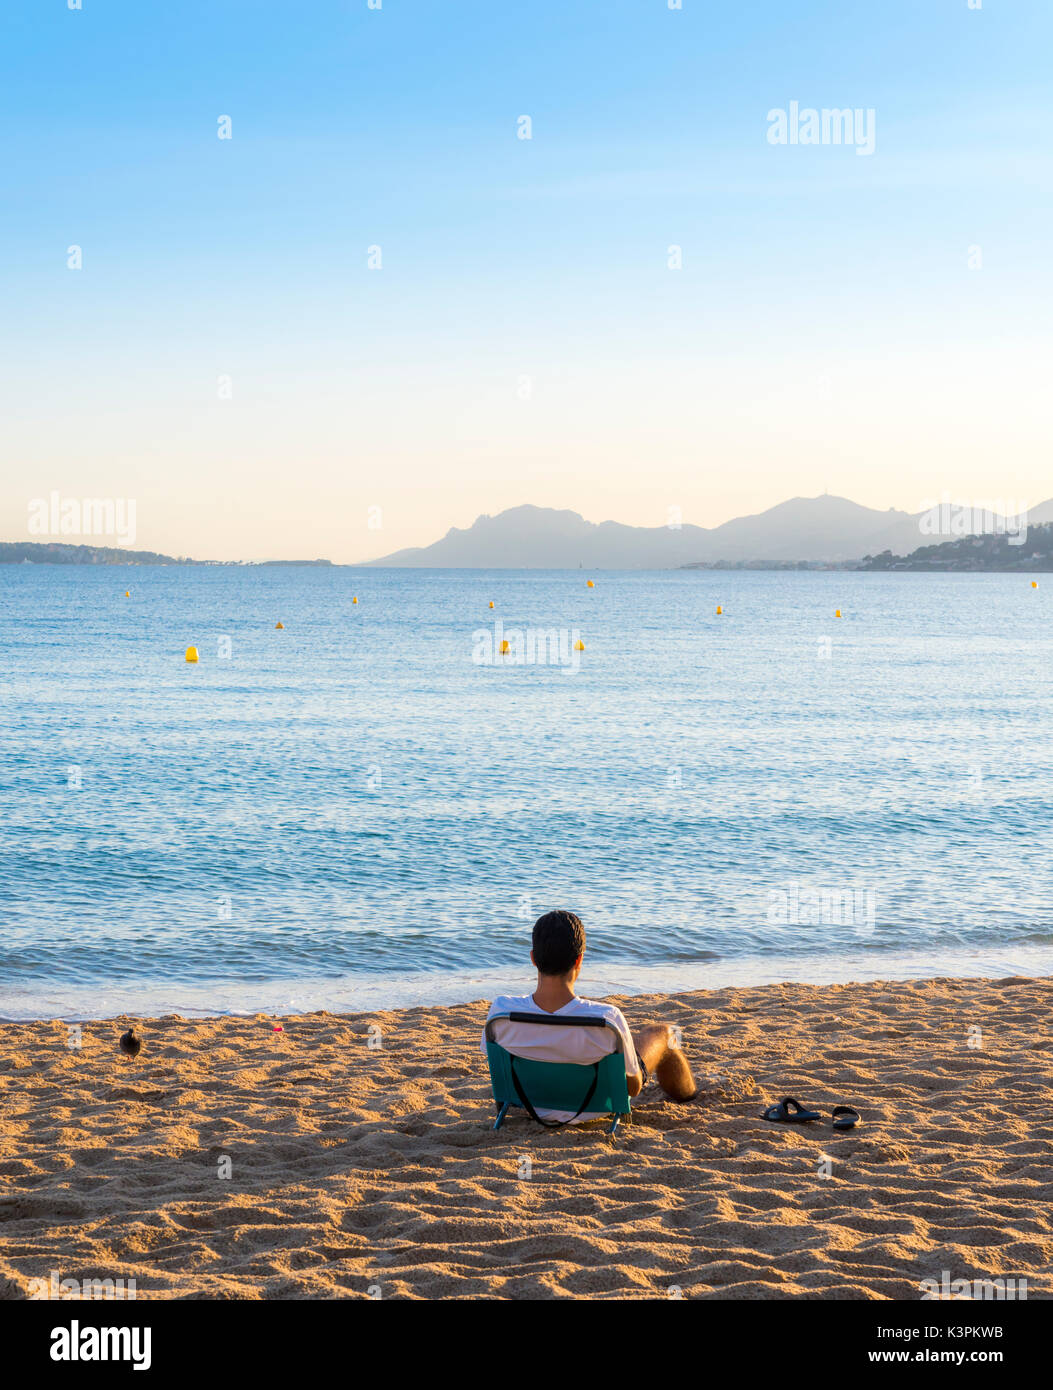 A young adult sits on an empty beach lounger overlooking a bay in Cote d'Azur, France at sunset Stock Photo